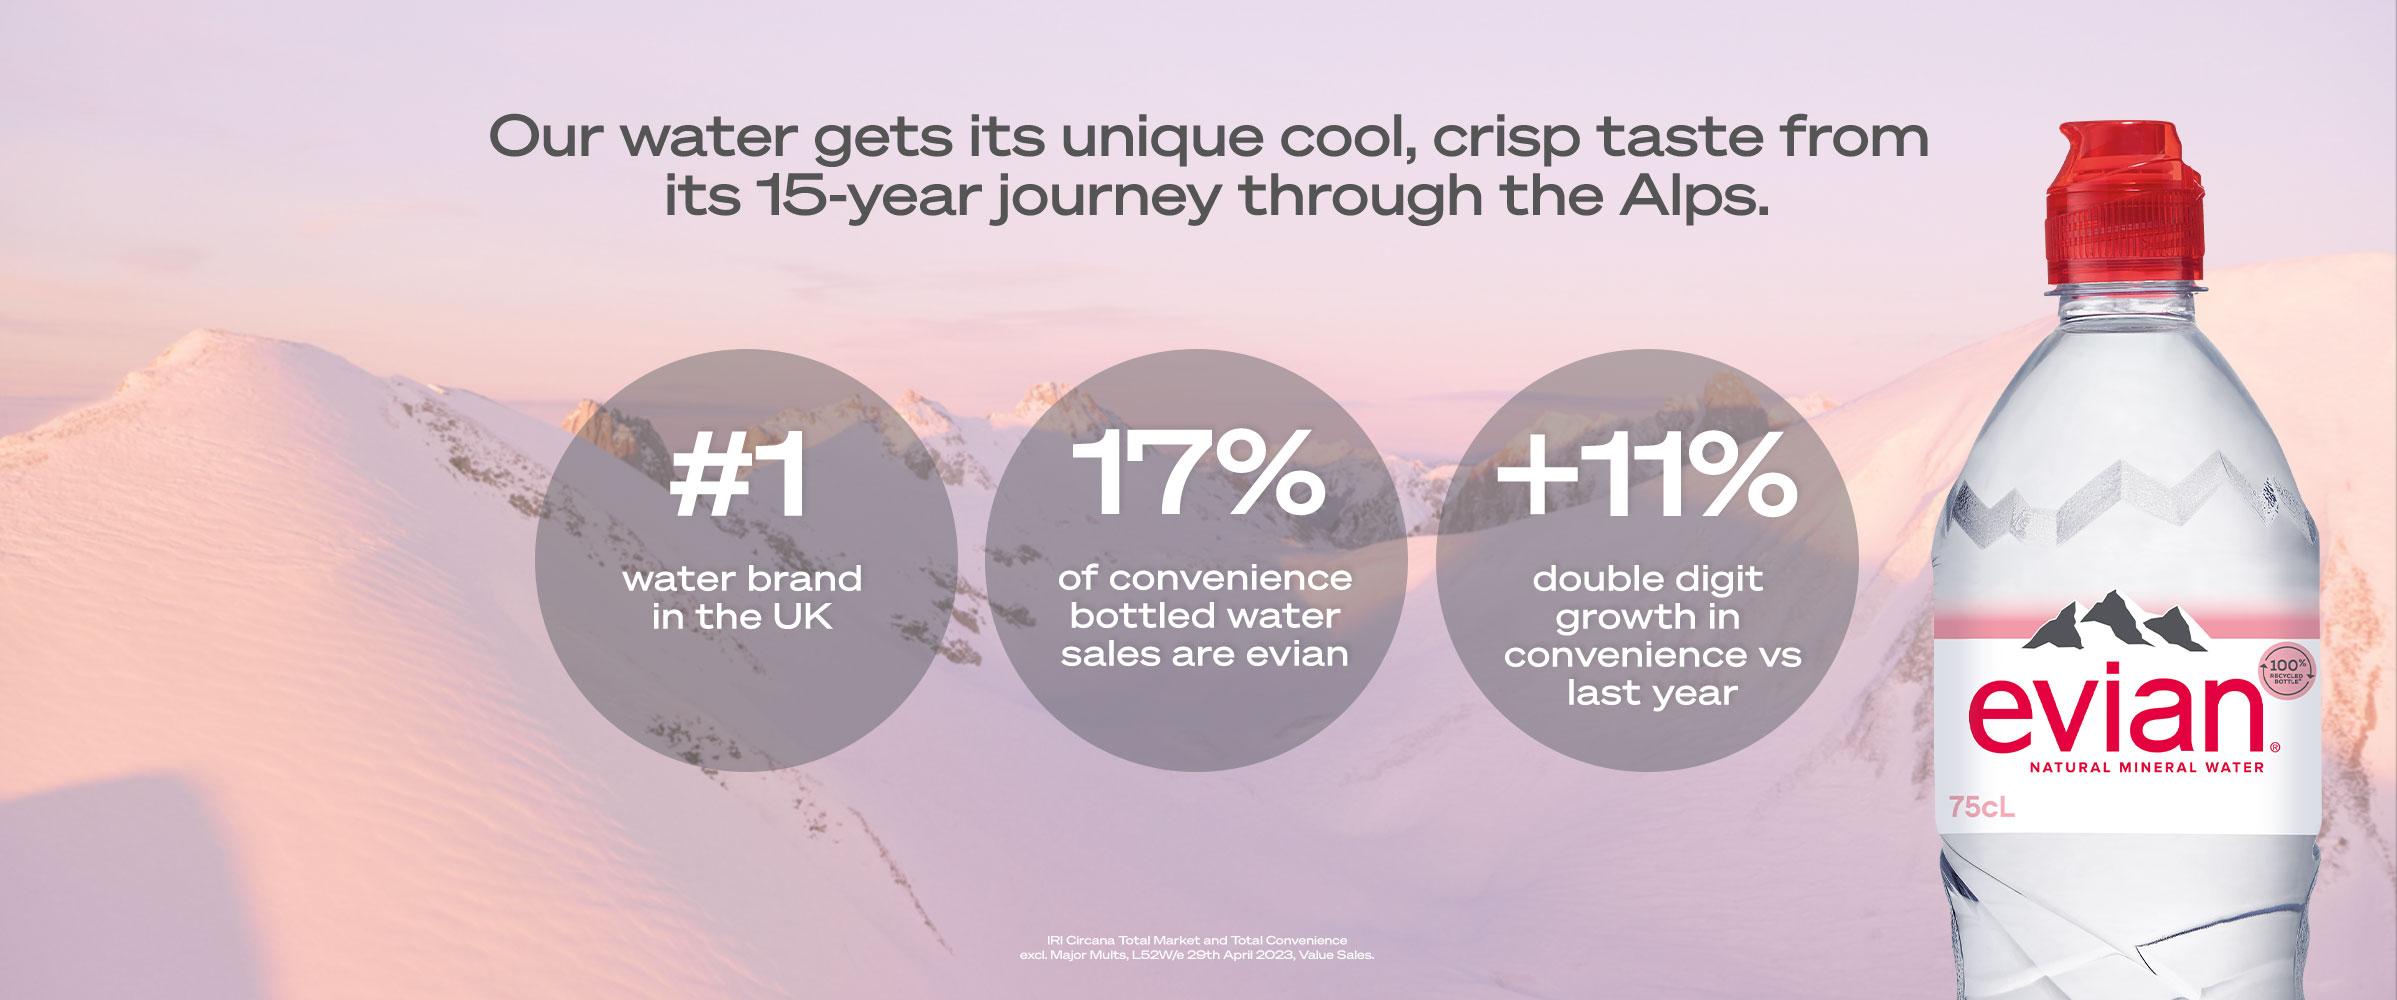 Our water gets its unique cool, crisp taste from its 15-year journey through the Alps